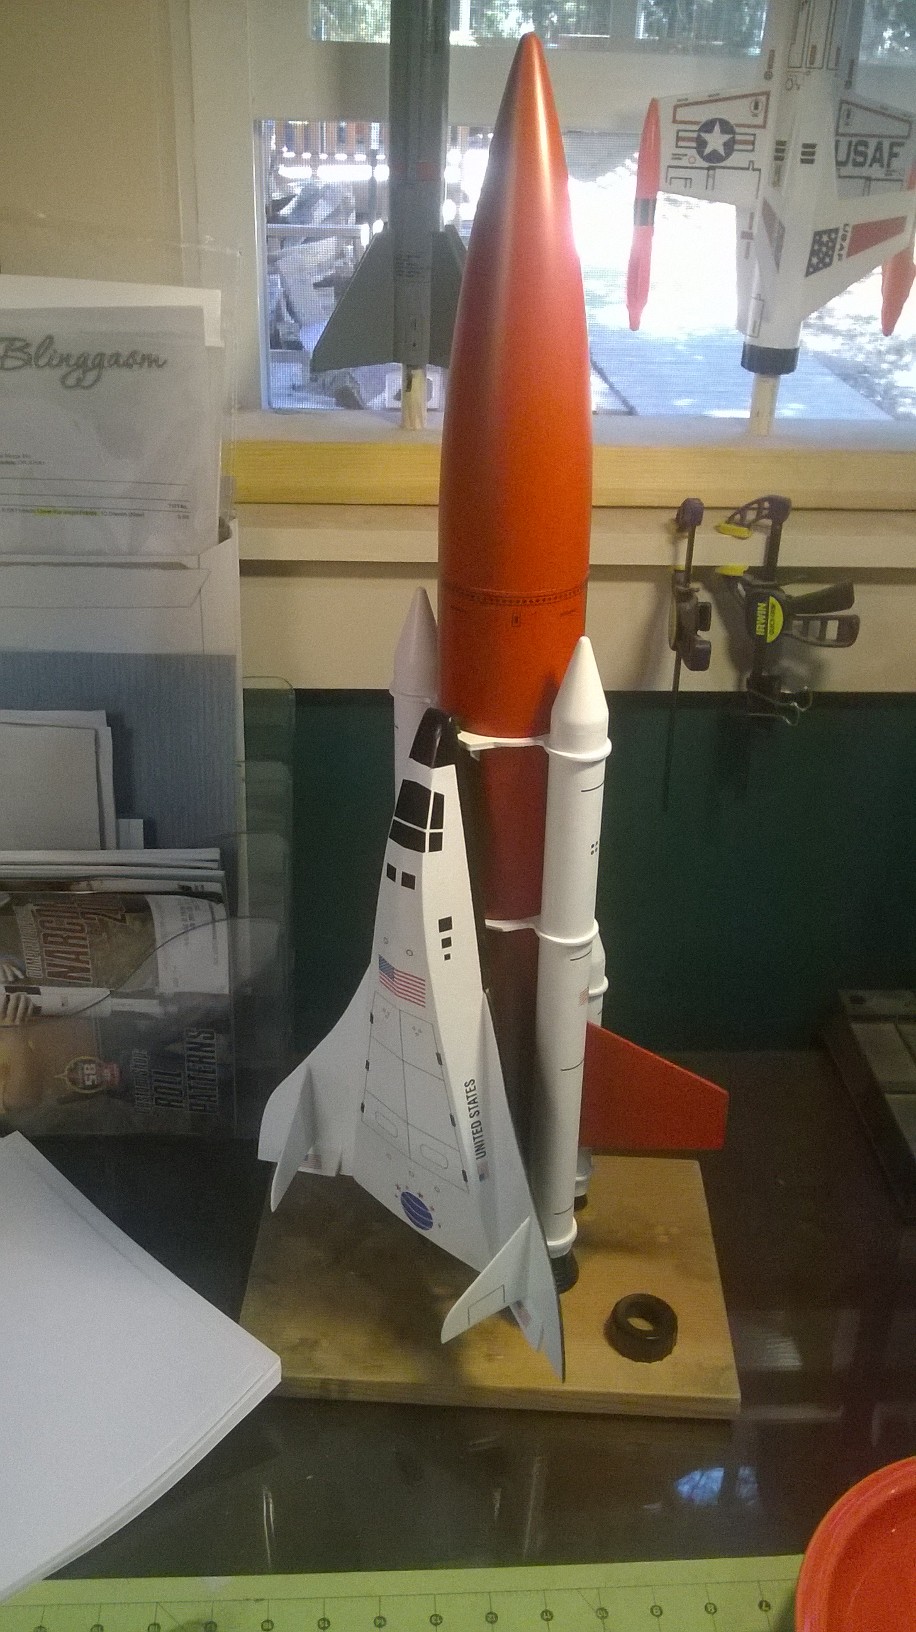 Daniel Peirce is busy at it completing the new shuttle from Estes. I need to get busy building mine.